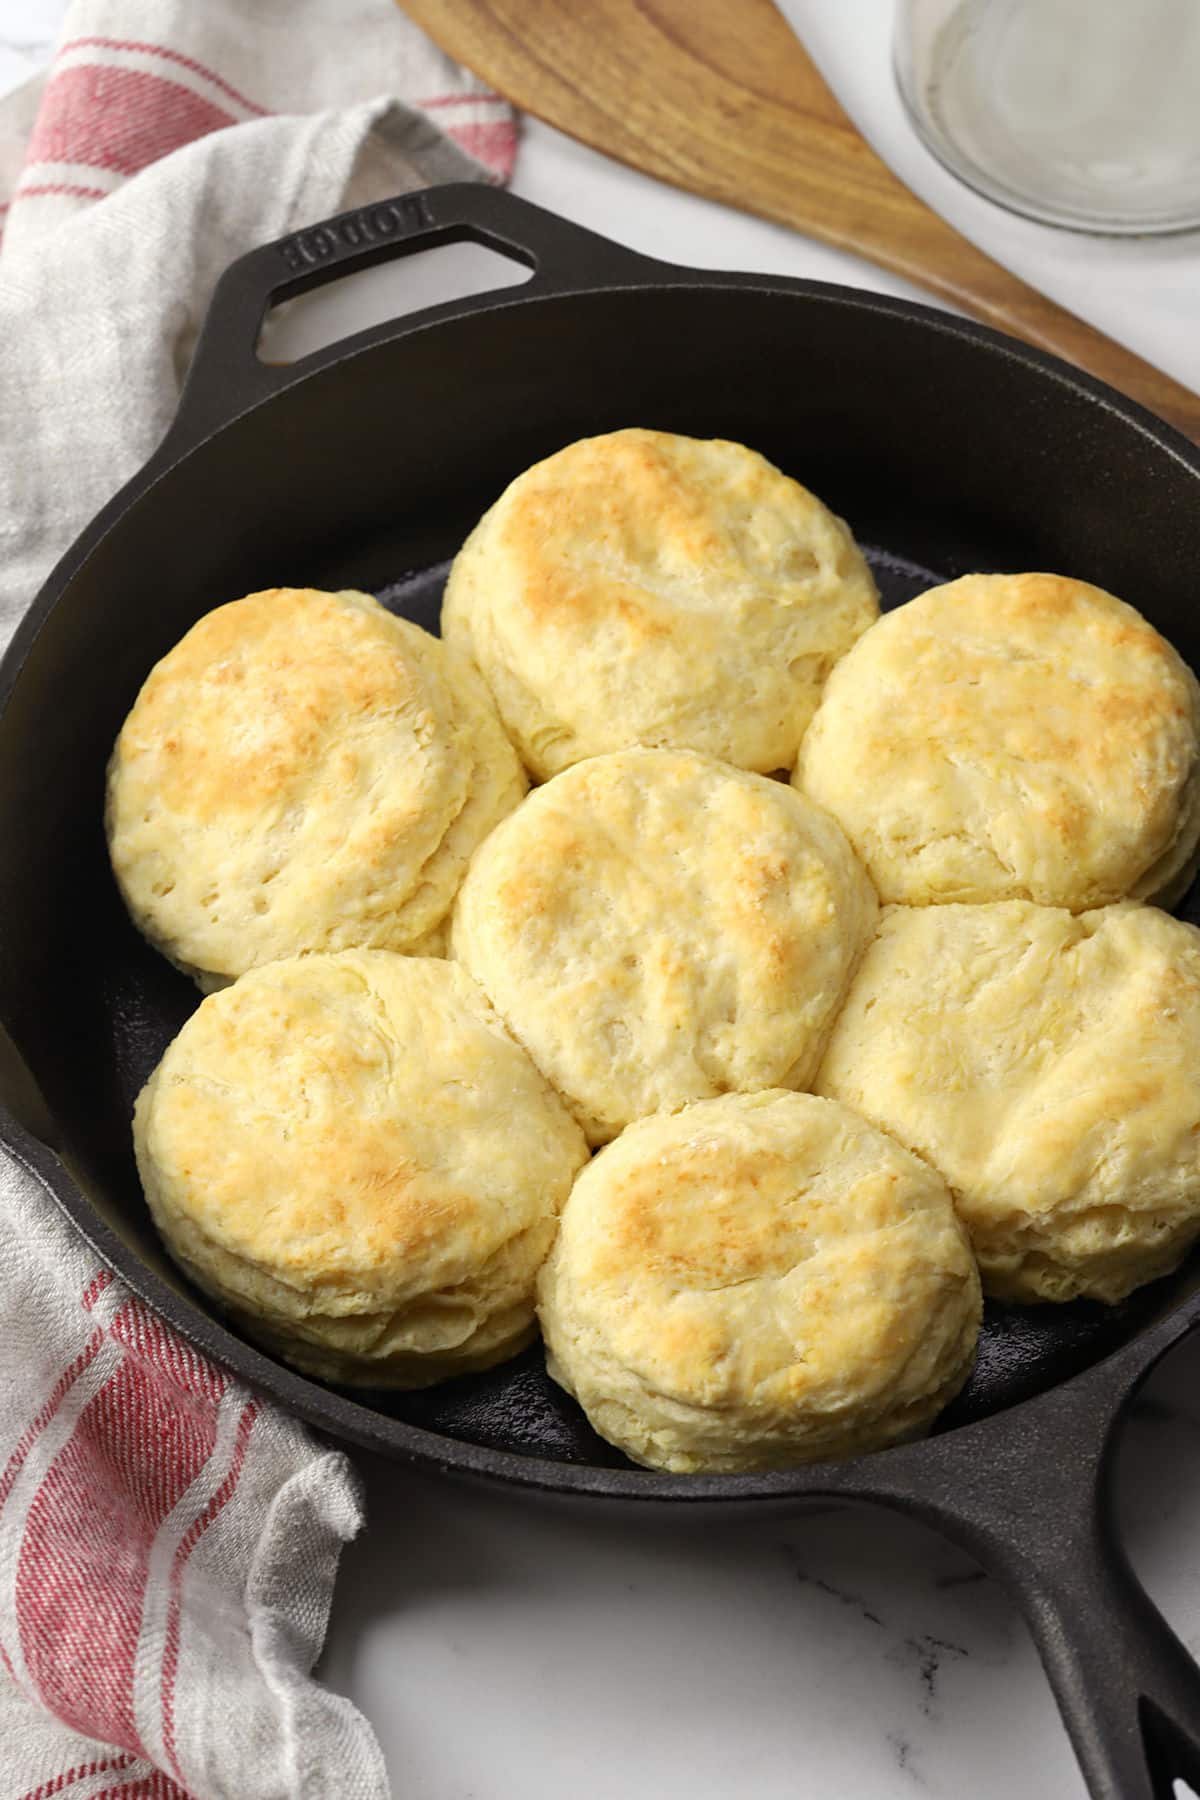 Cast iron pan filled with baked buttermilk biscuits.